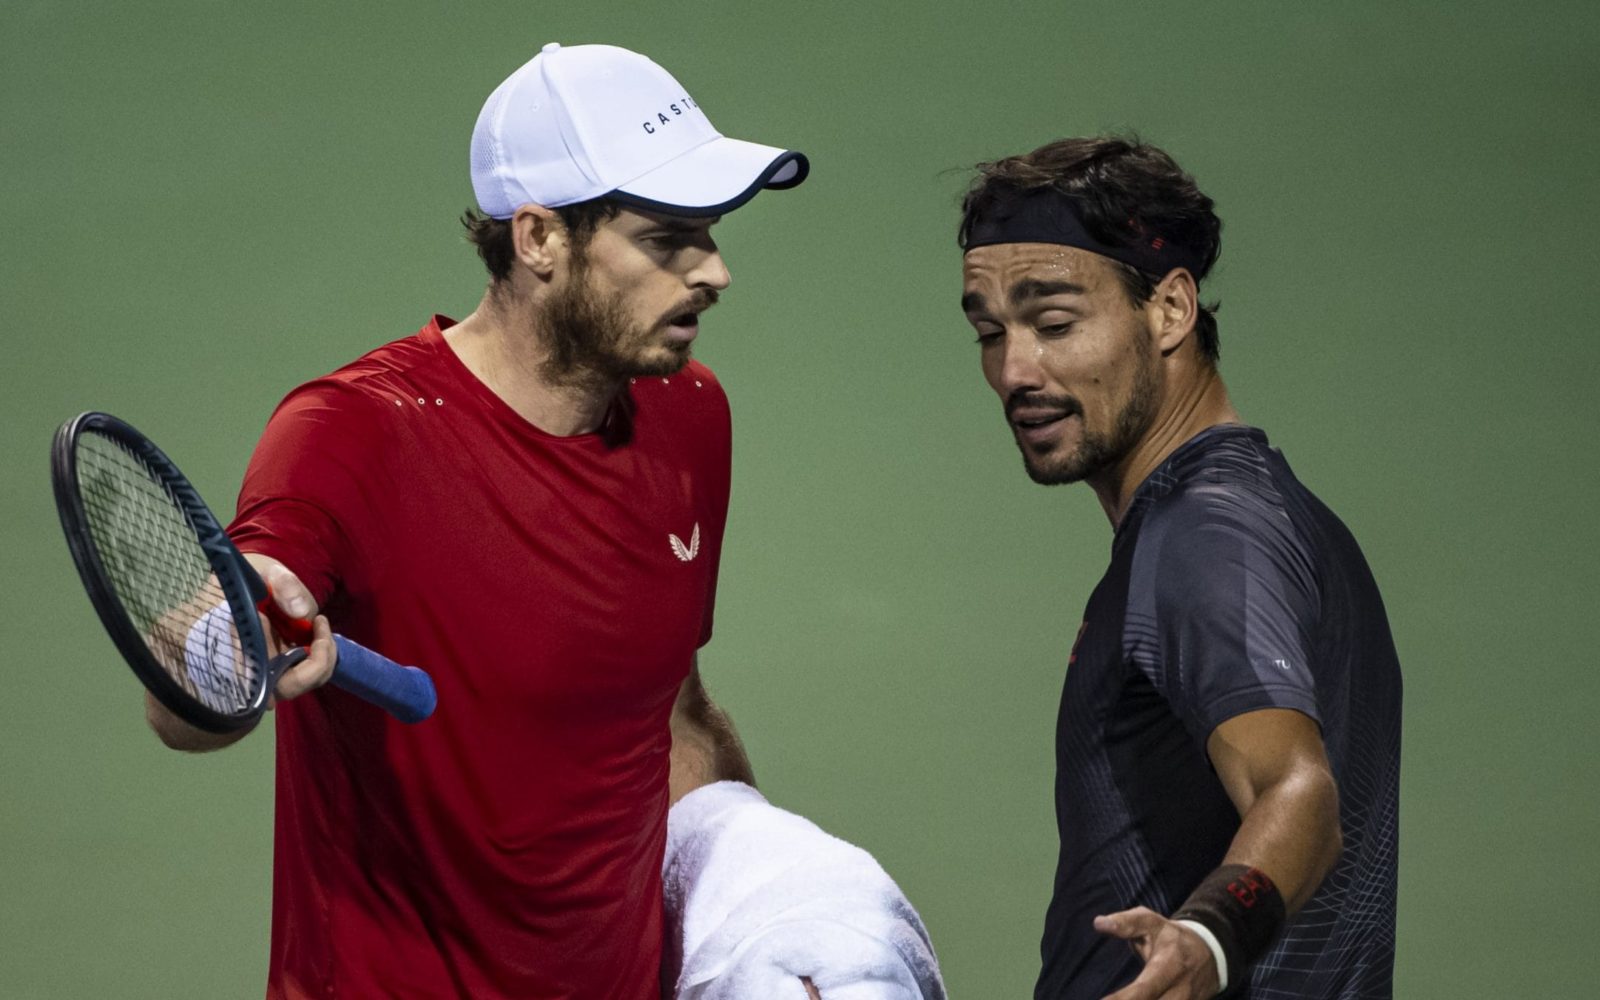 Andy Murray vs Fabio Fognini start time and how to watch Italian Open match